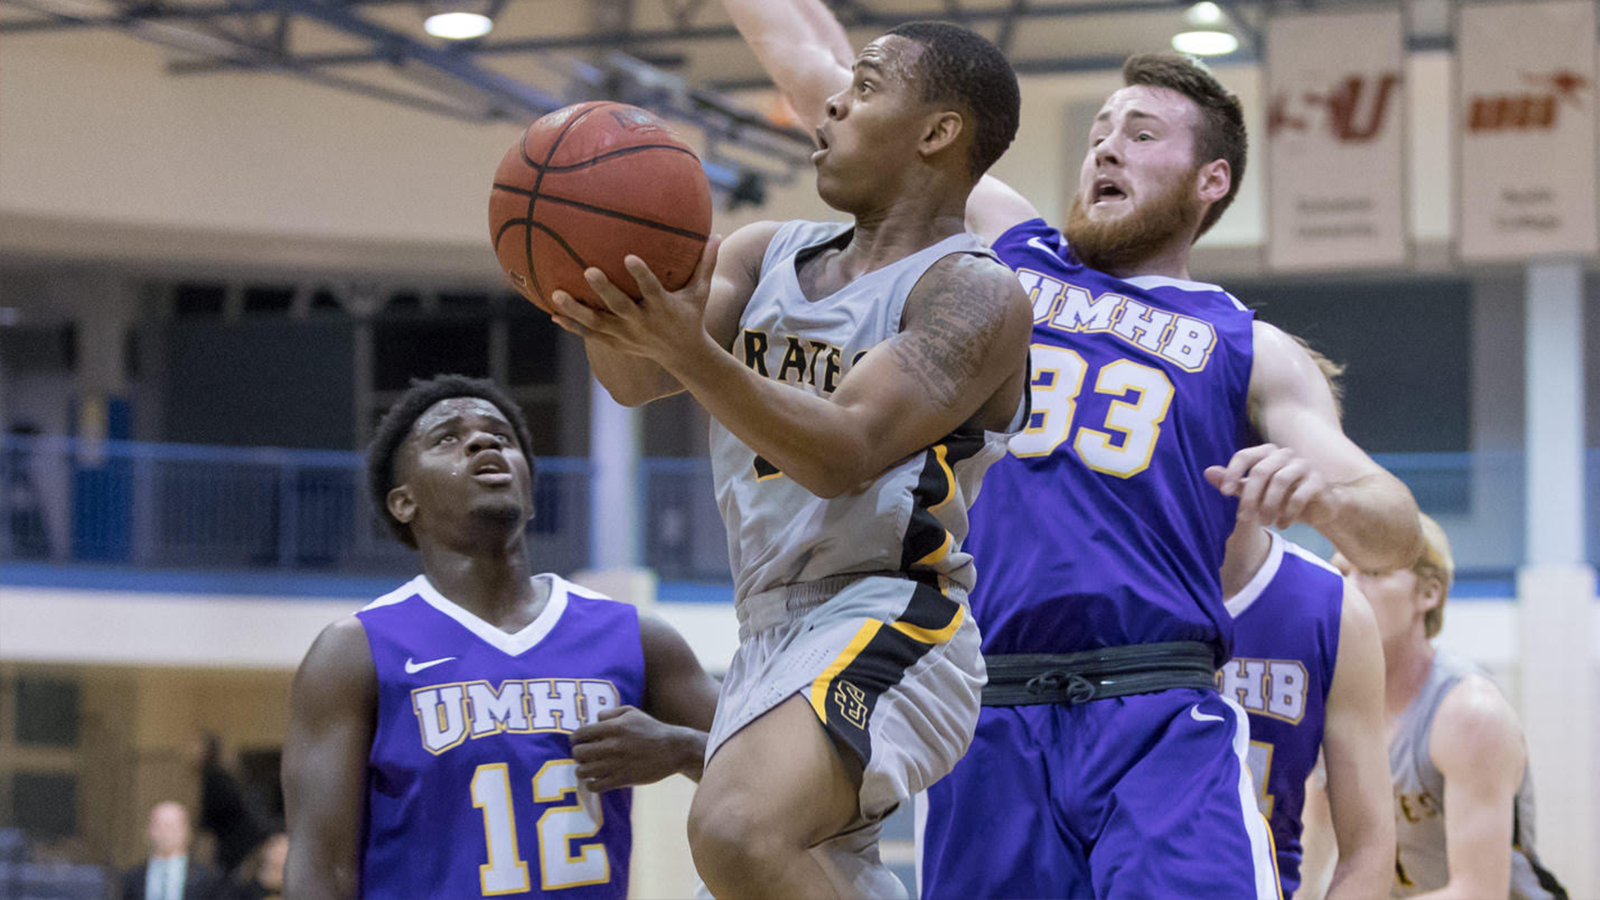 Pirates Fall to UMHB in Offensive Showdown